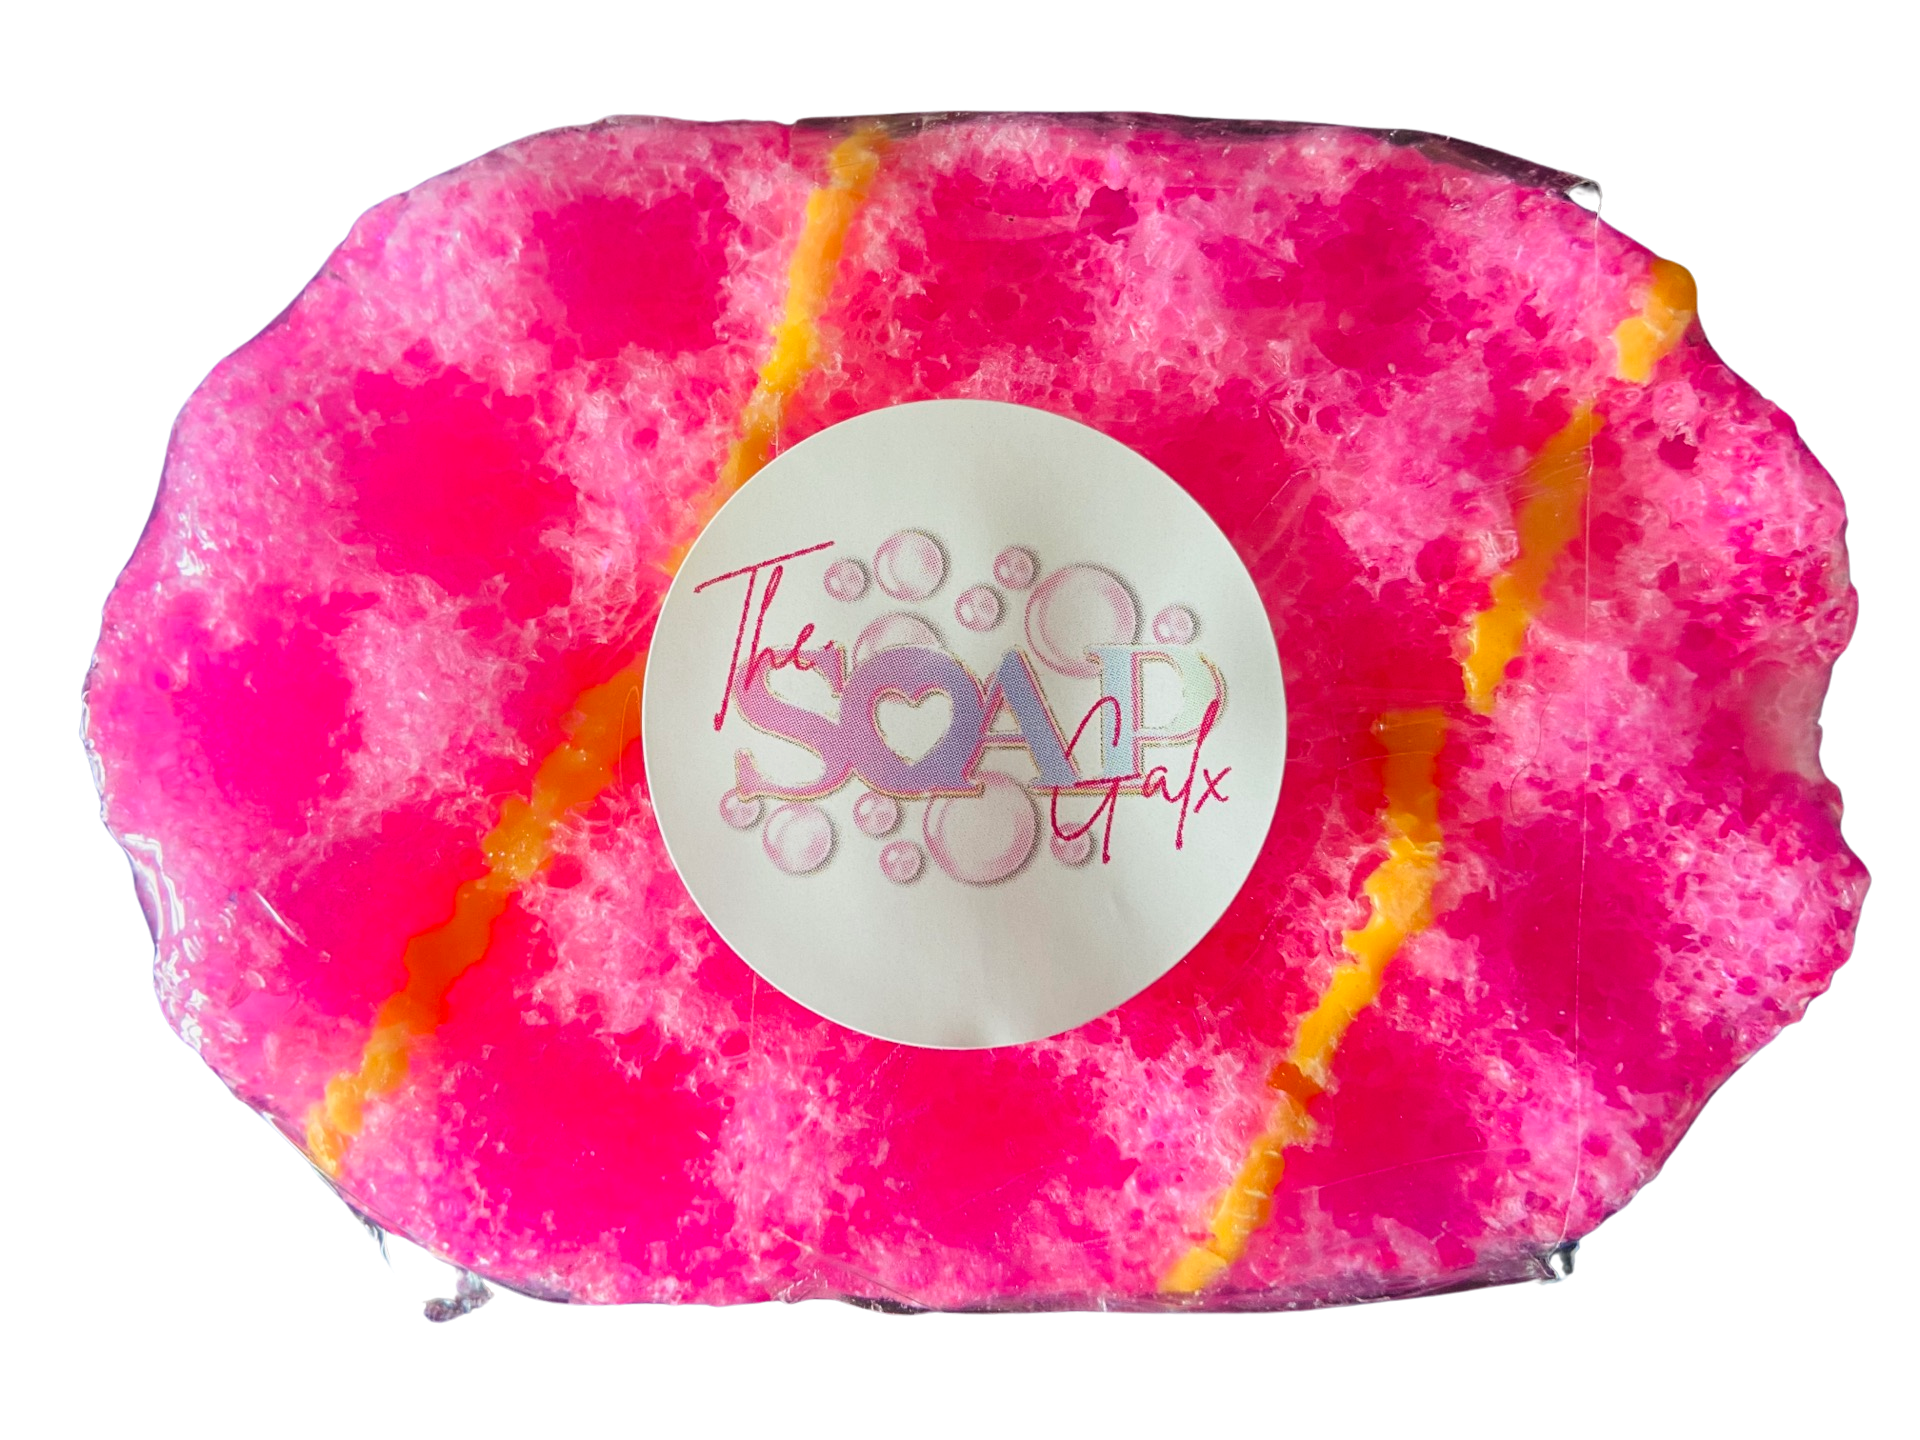 A pink Mini Exfoliating Soap Sponge with yellow and pink sprinkles on it from The Soap Gal x.